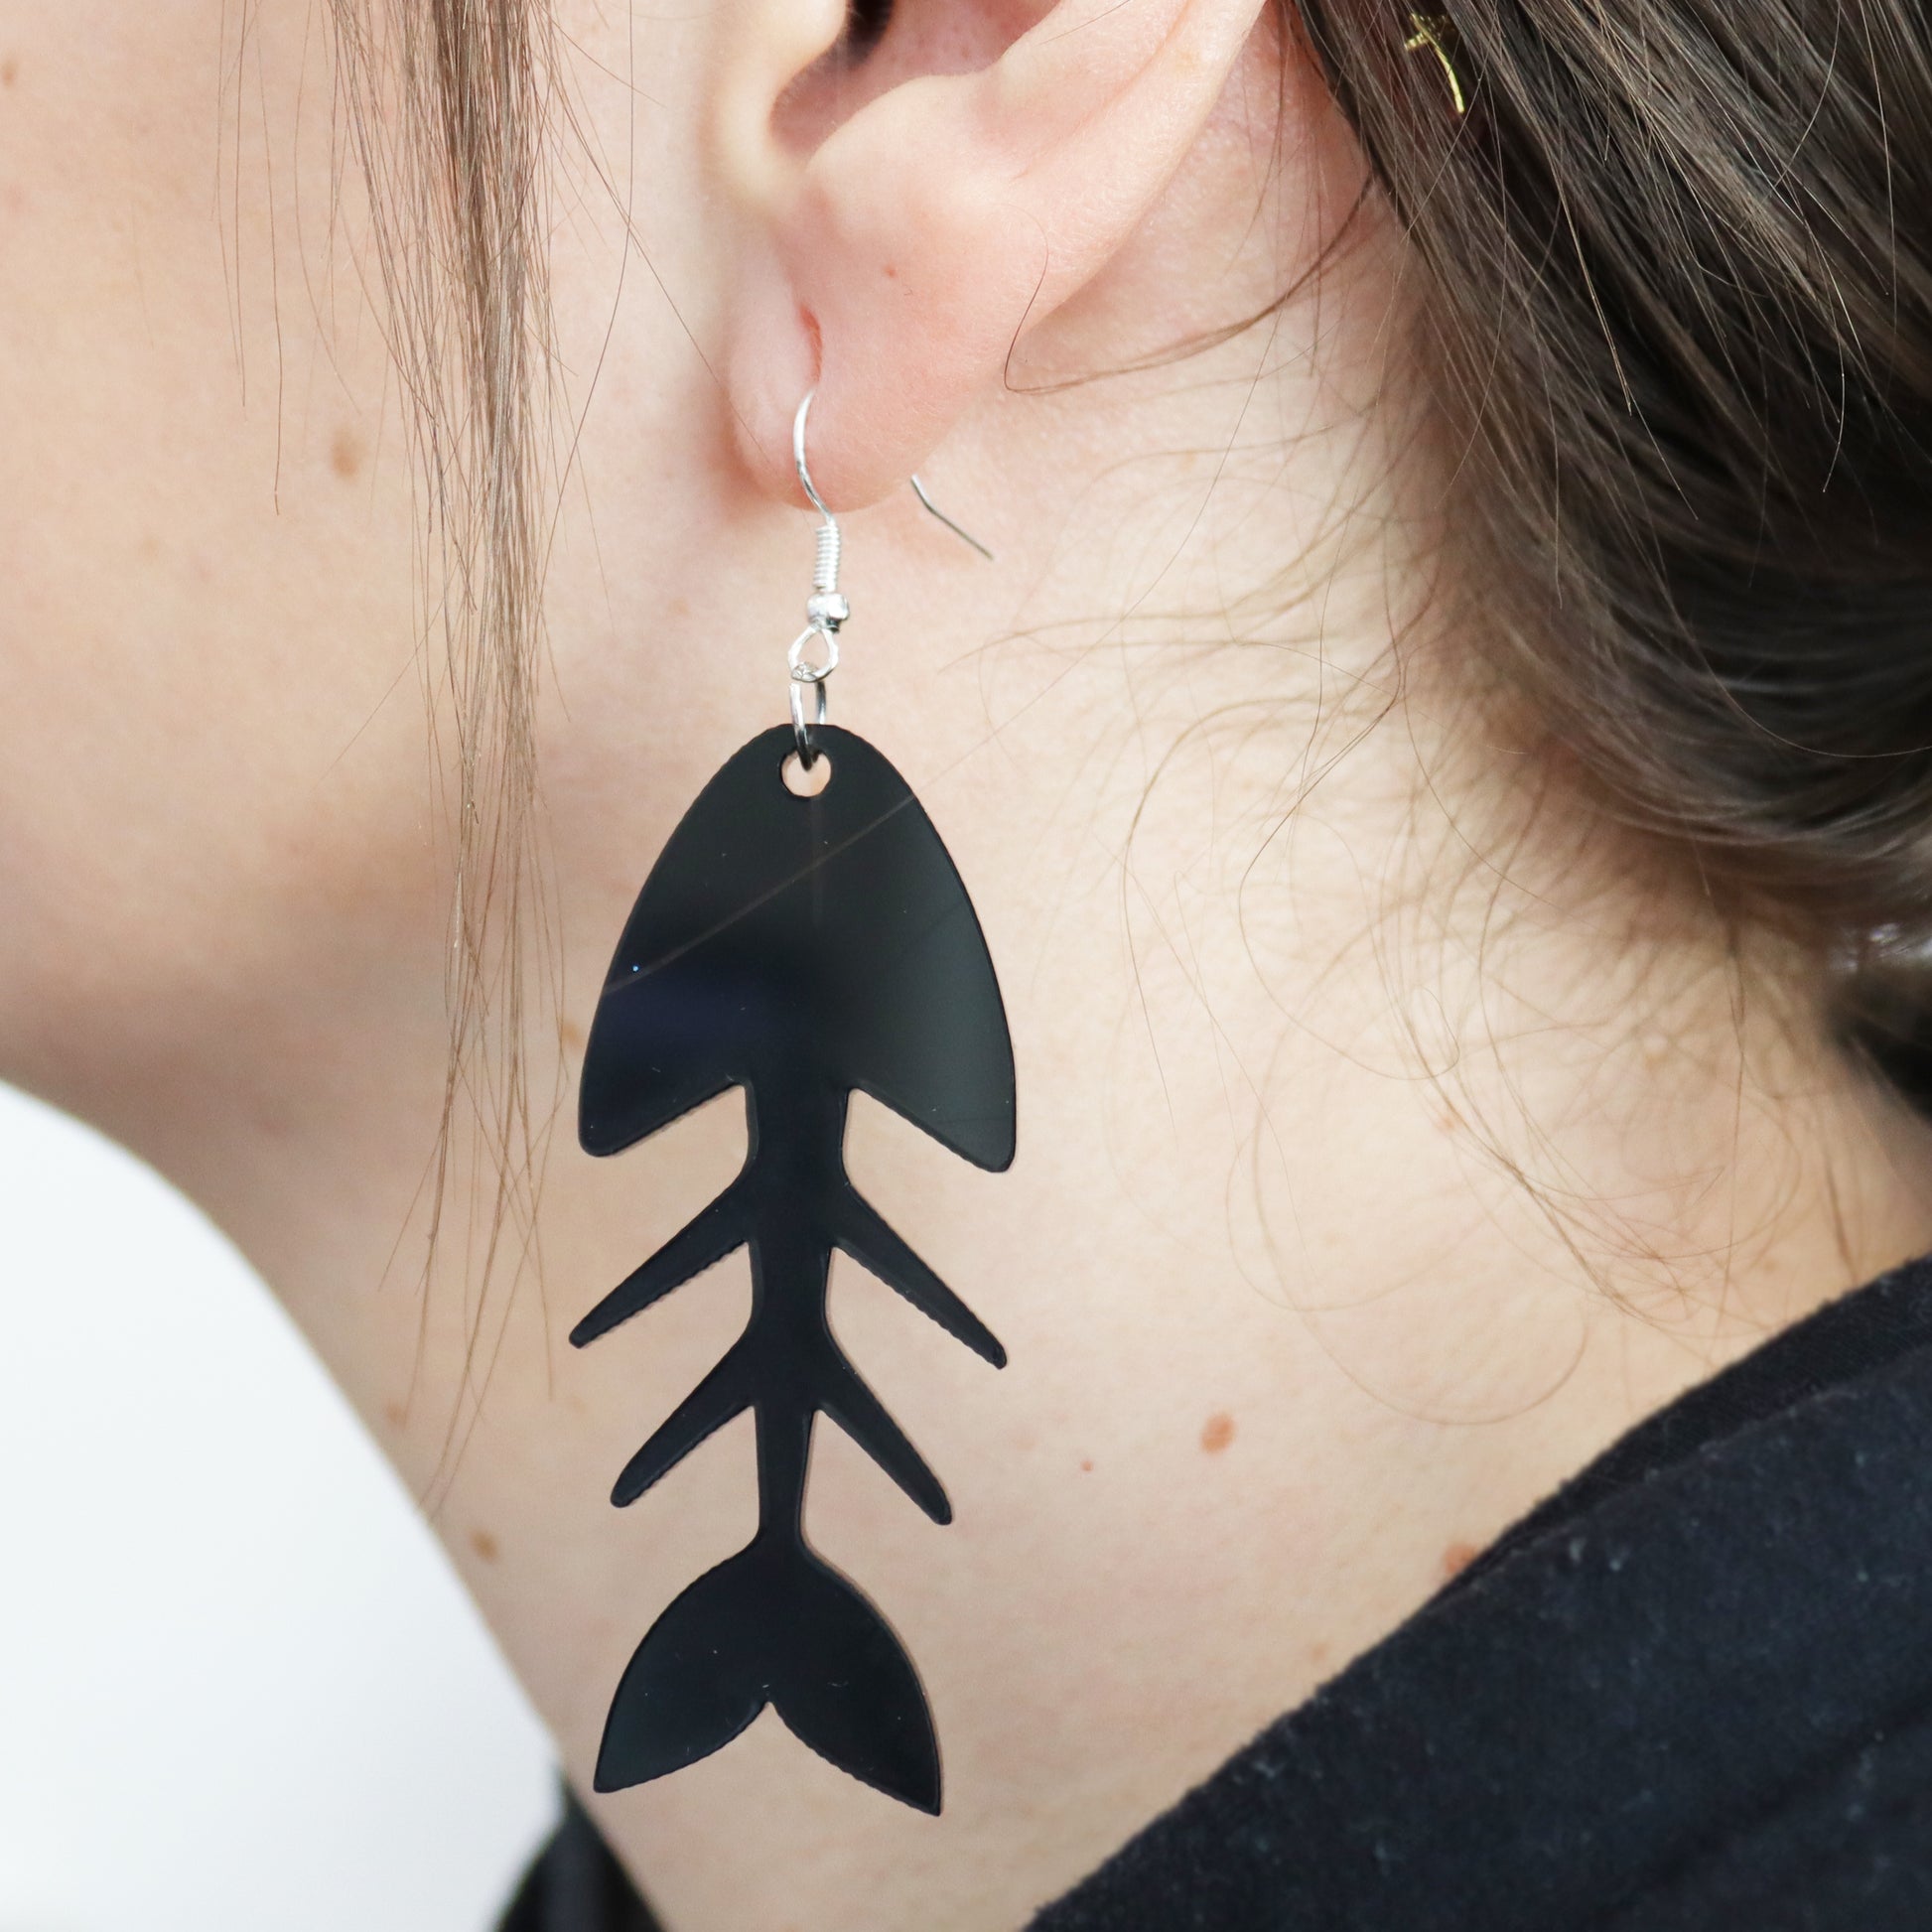 large fish bone earring cut from black acrylic and shown hanging in an ear